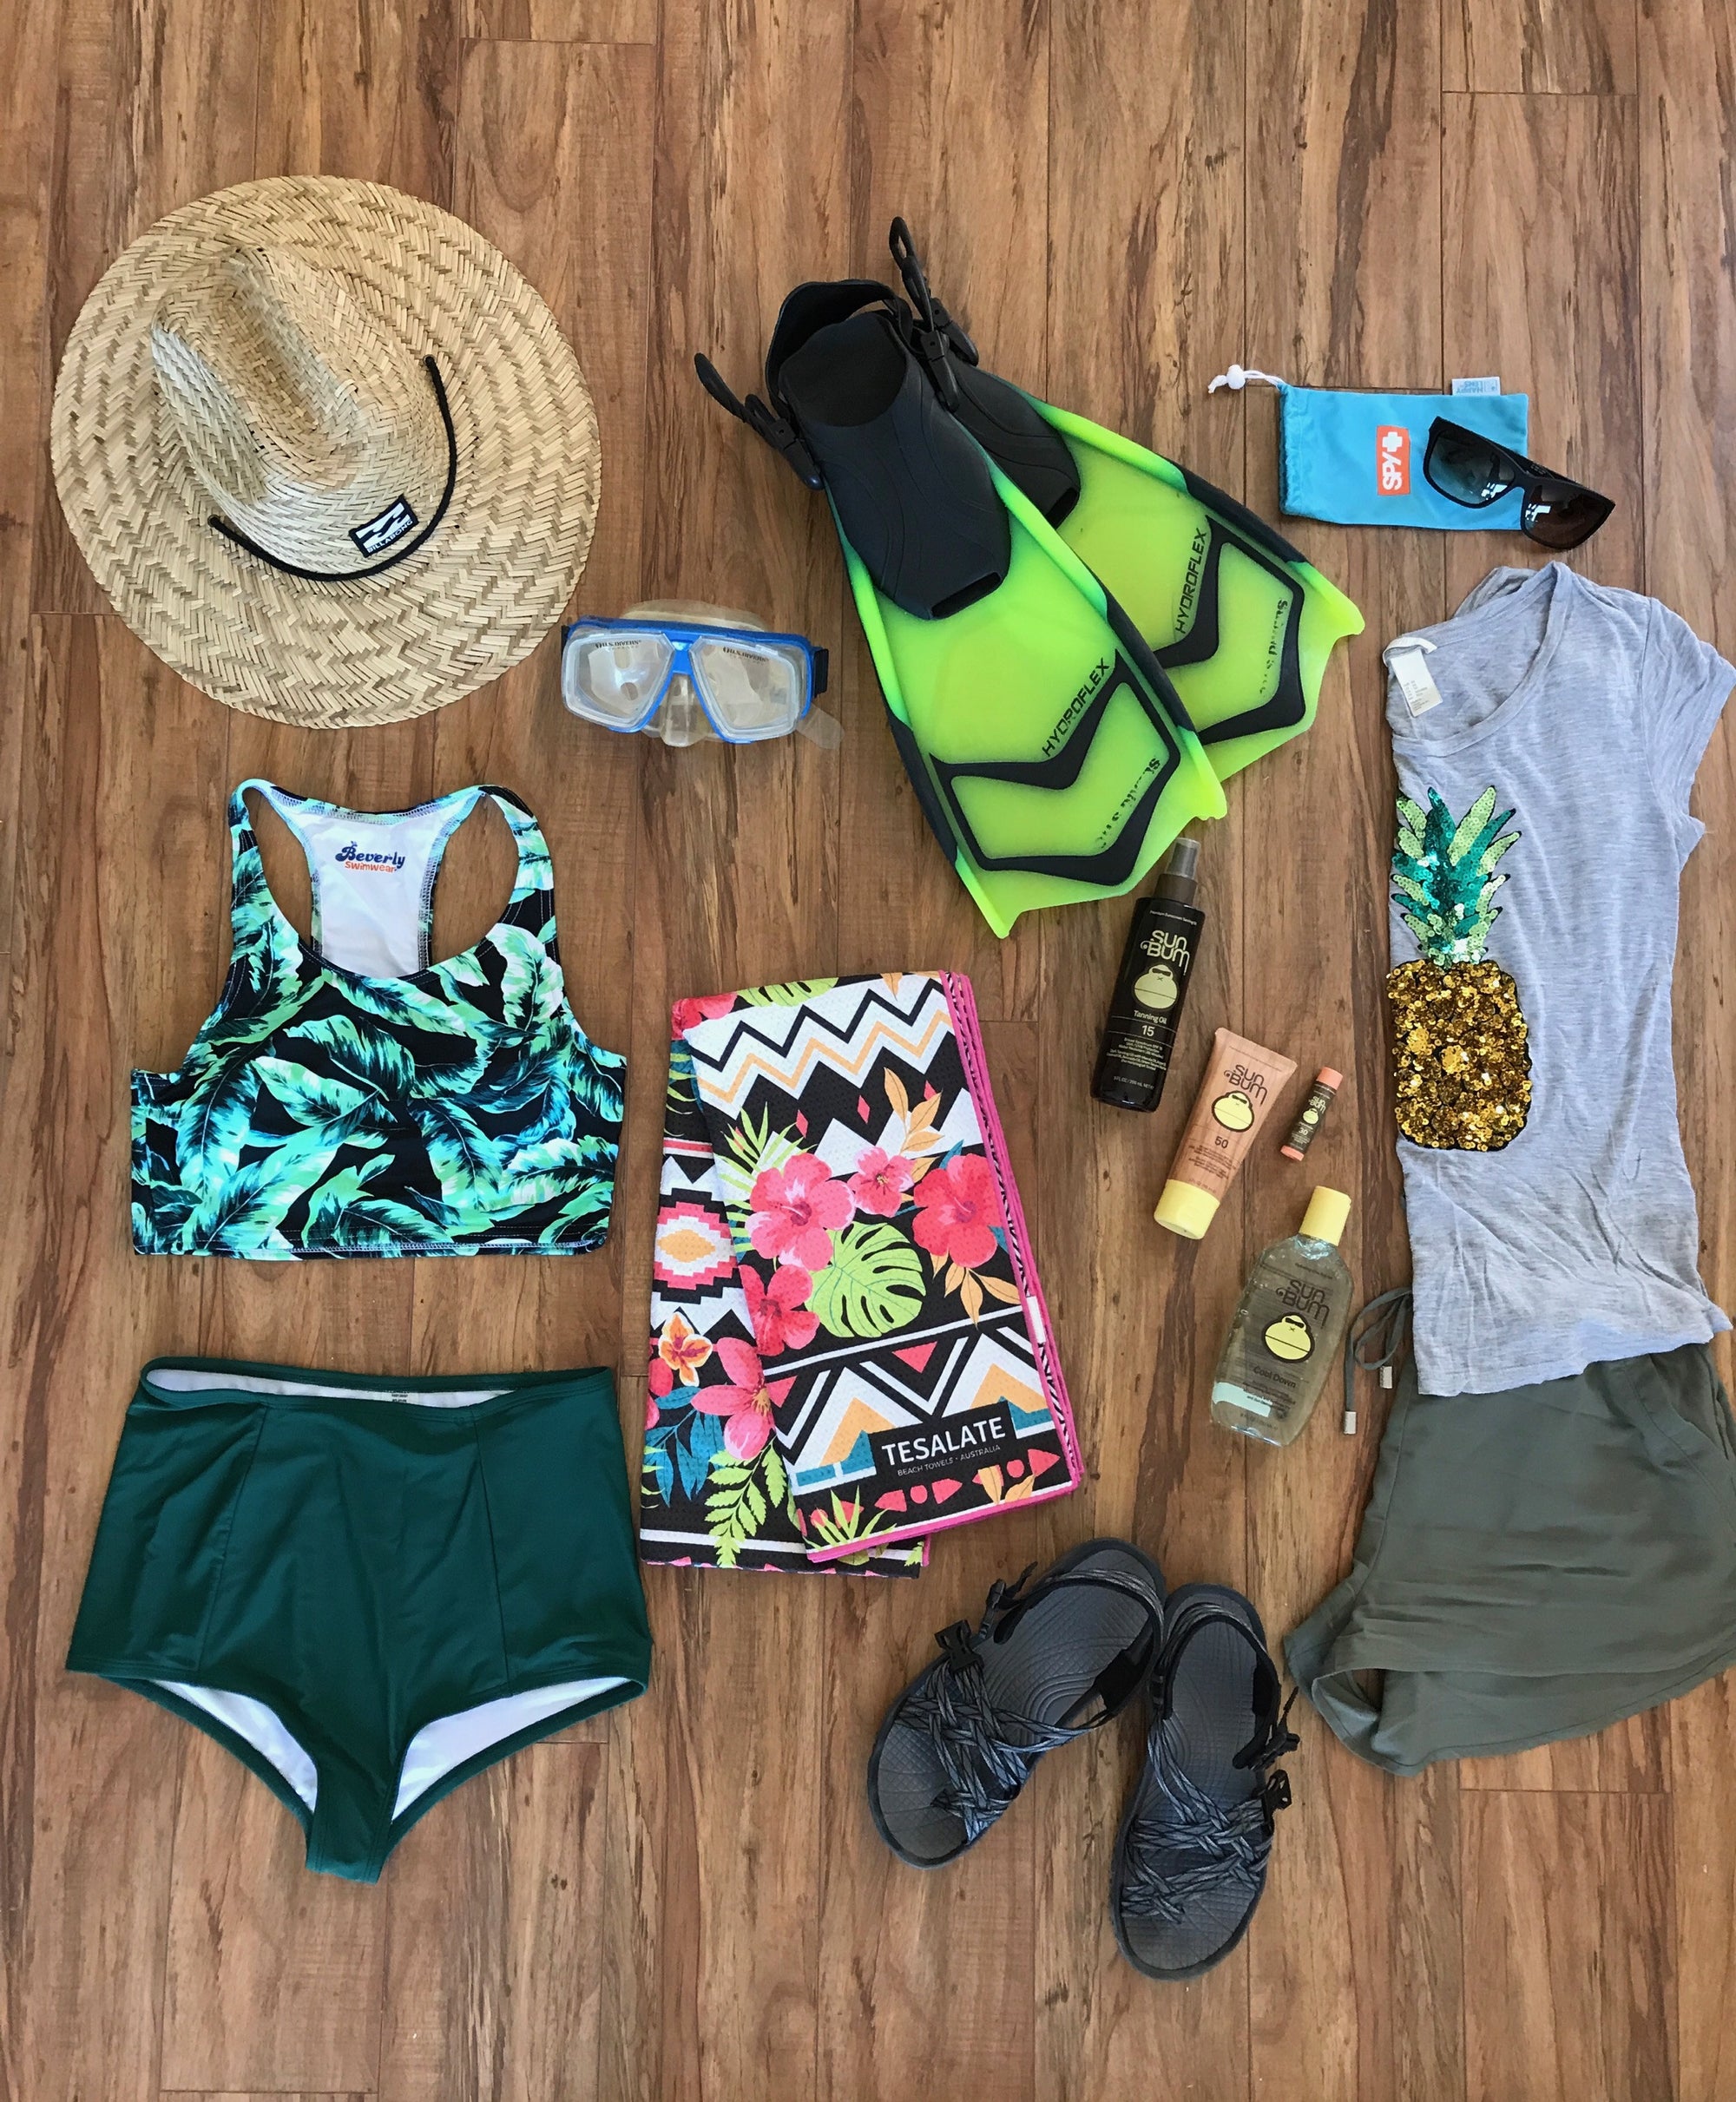 Packing List for Kauai - Essential Items for Travel